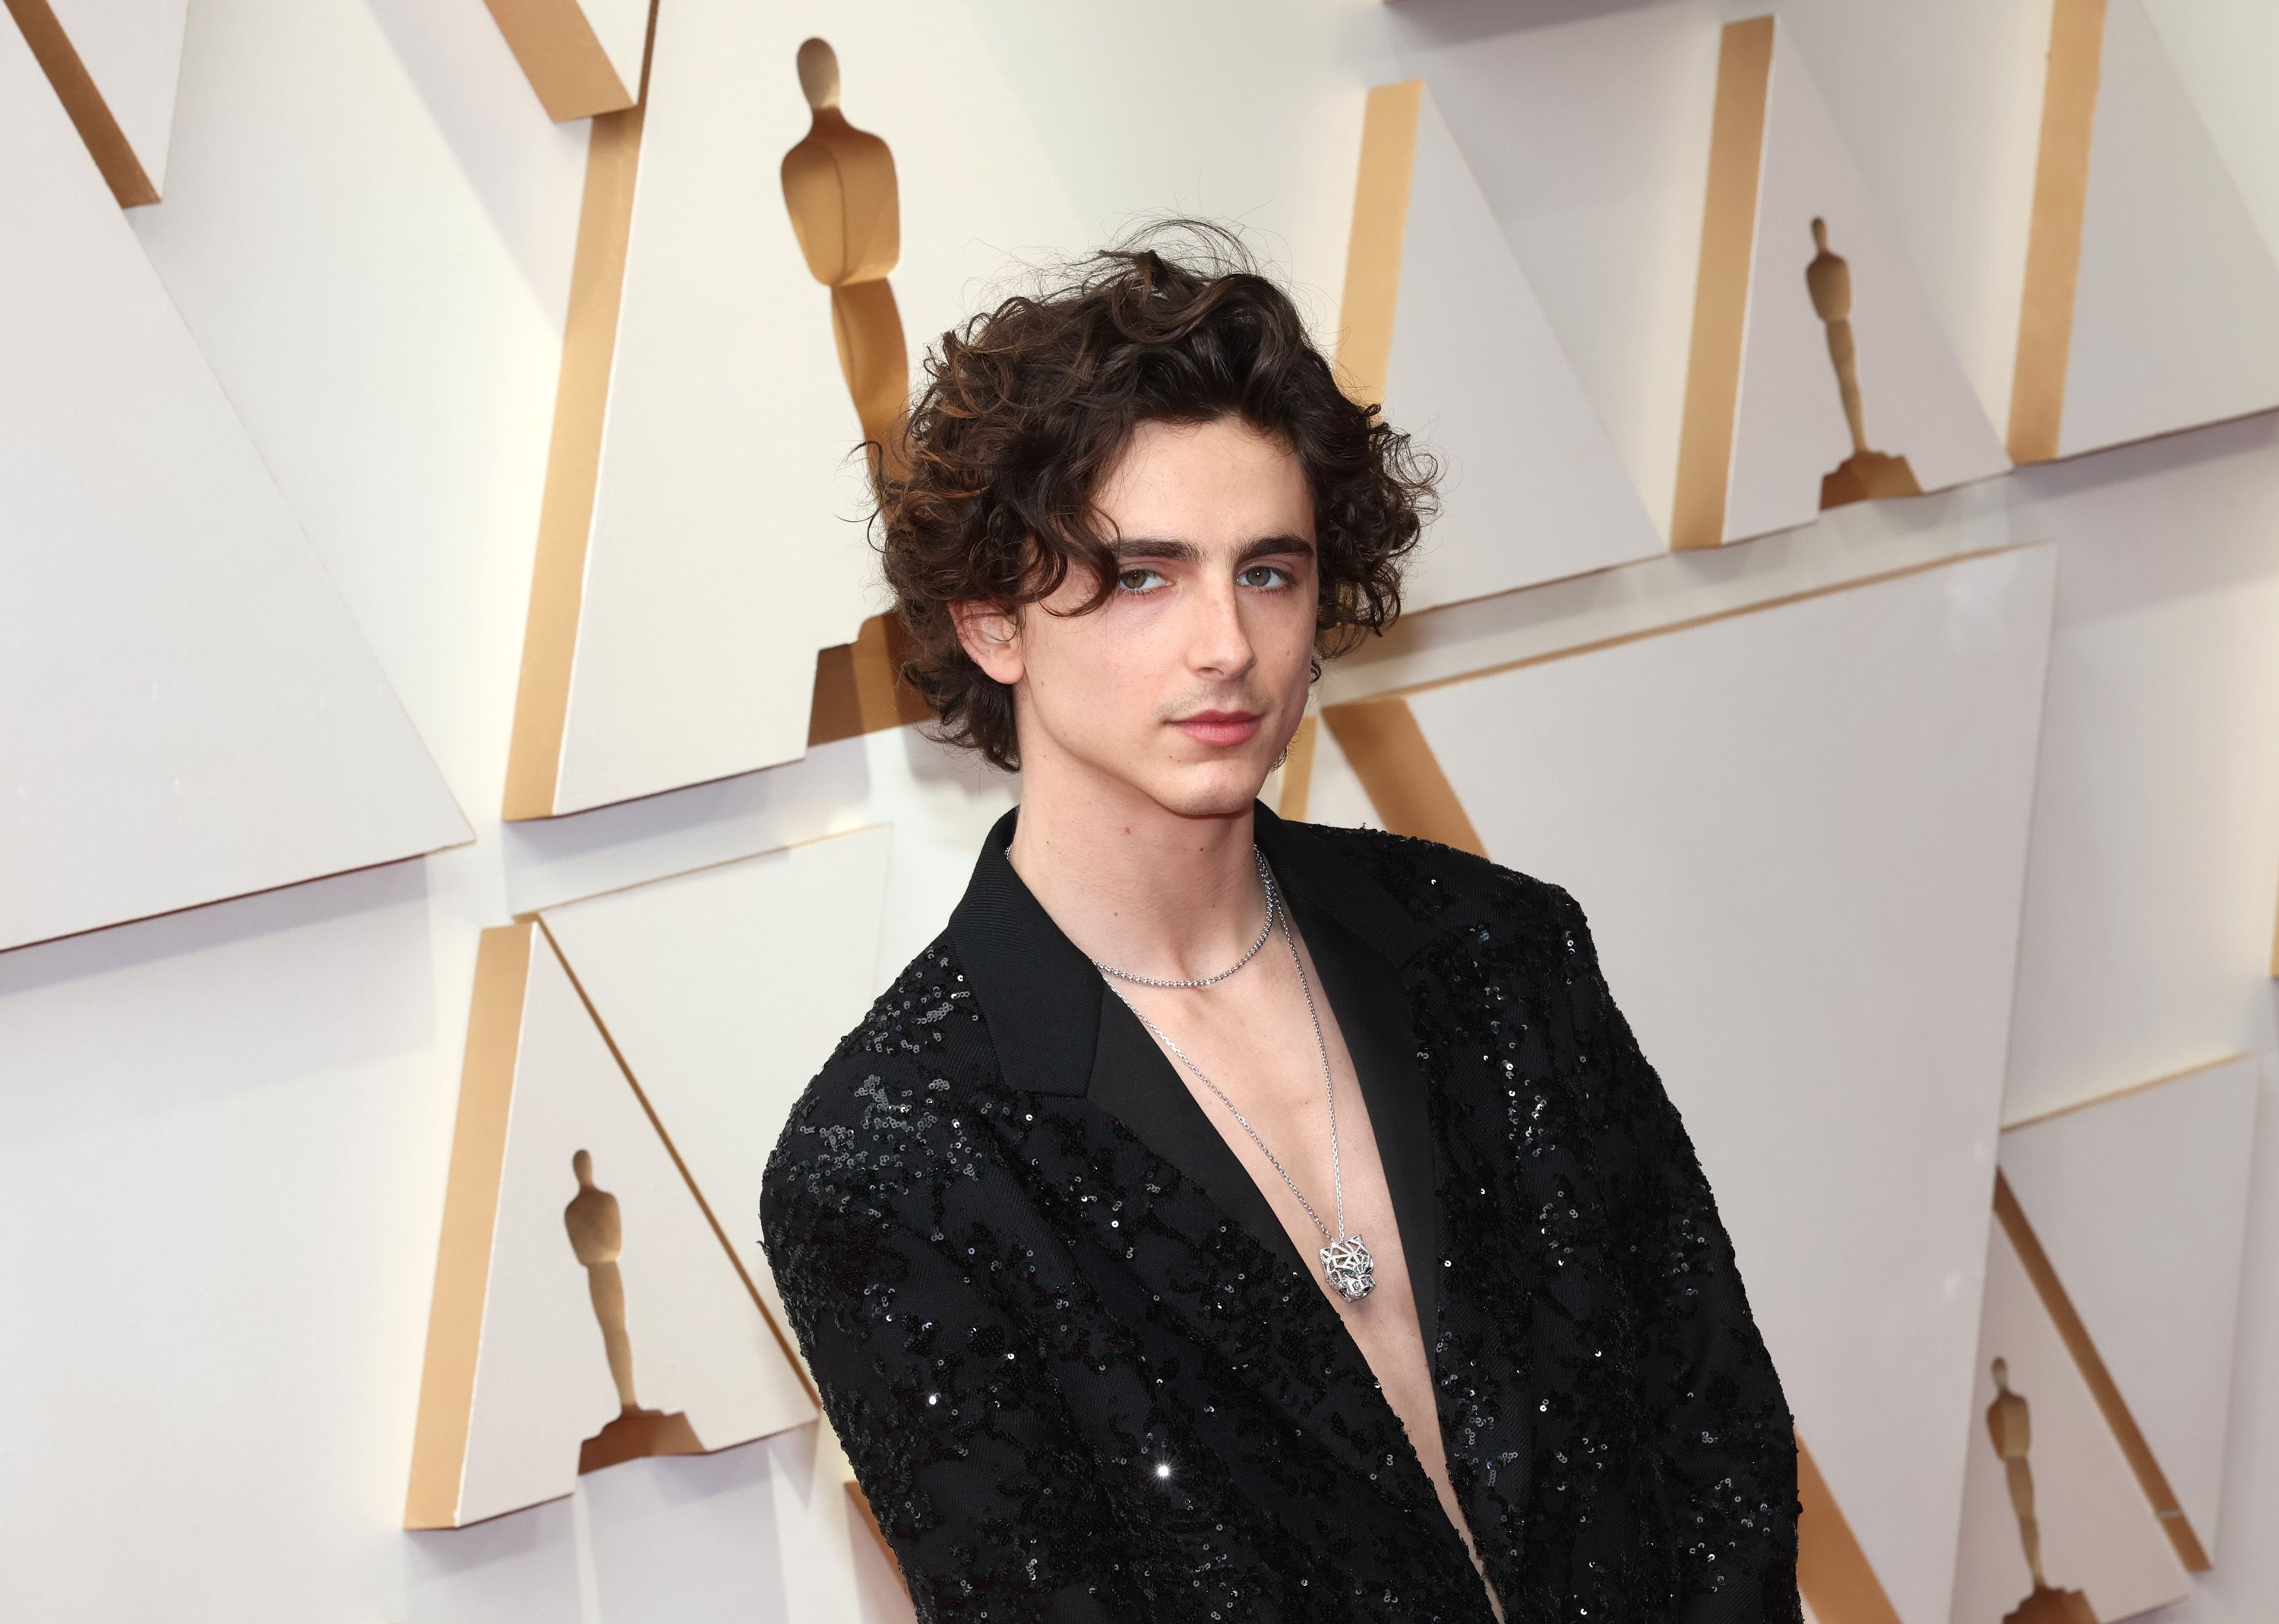 Timothée Chalamet Is Shirtless at the 2022 Oscars